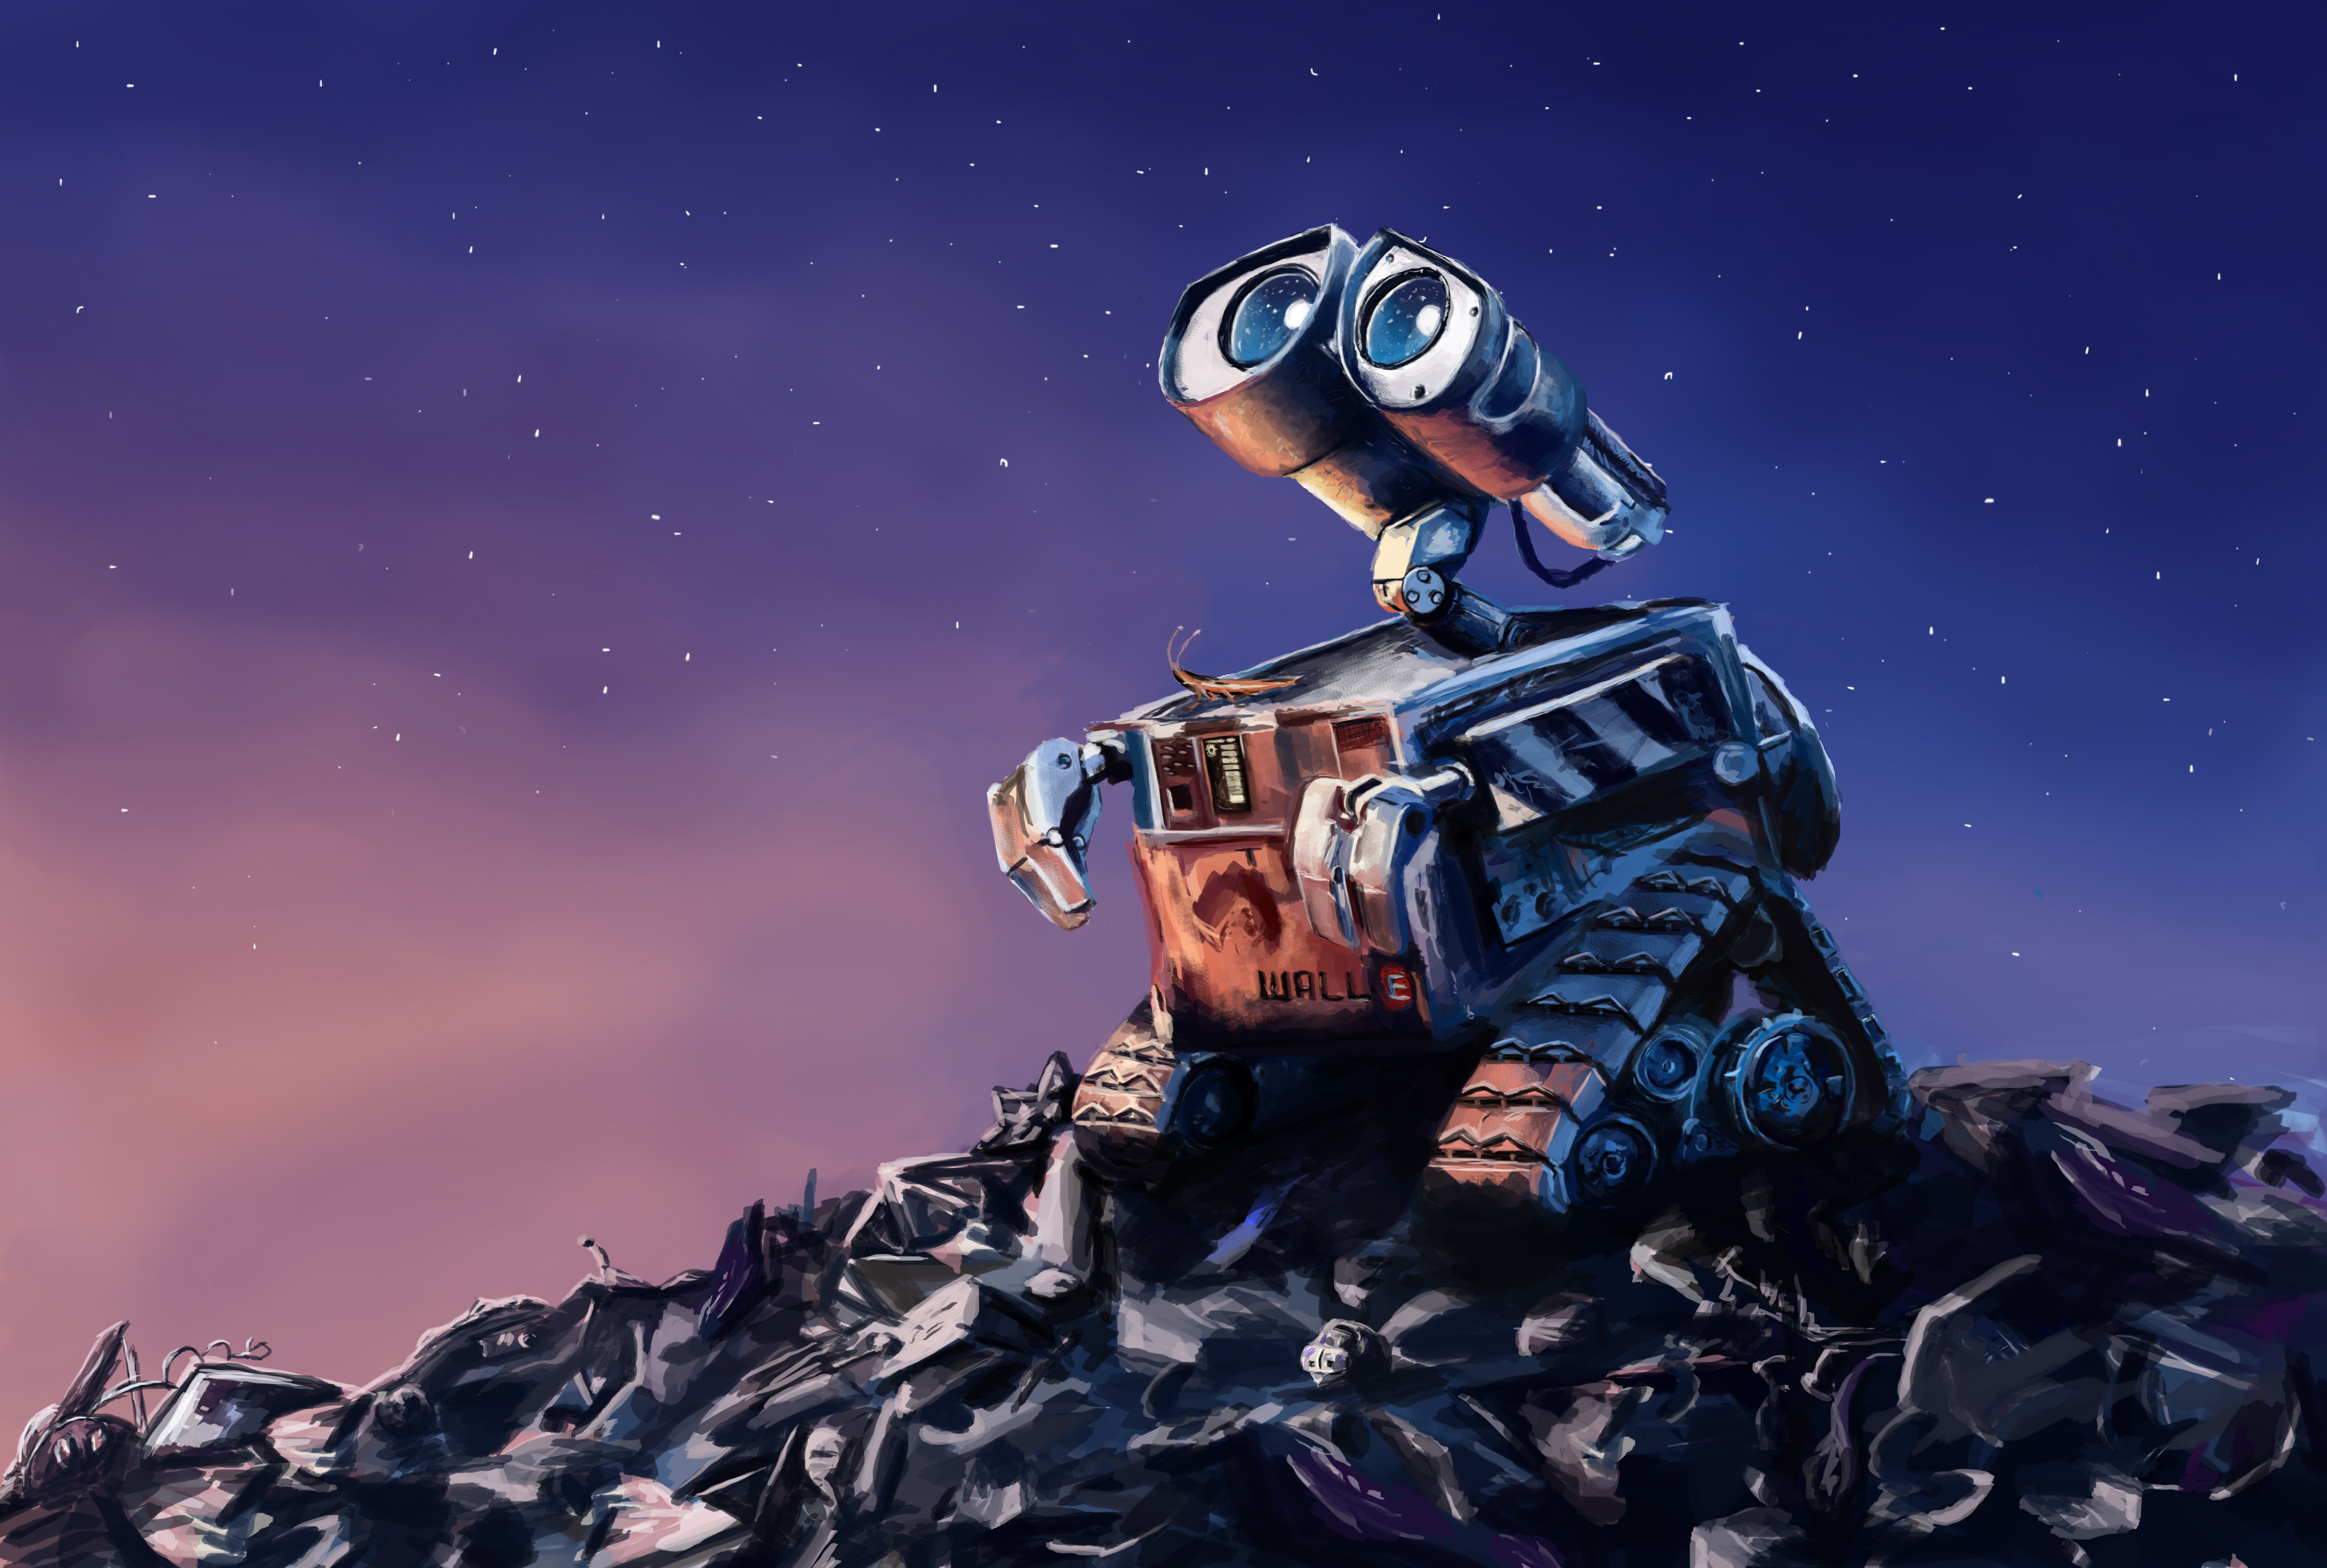 Amazing Wall·E Pictures & Backgrounds